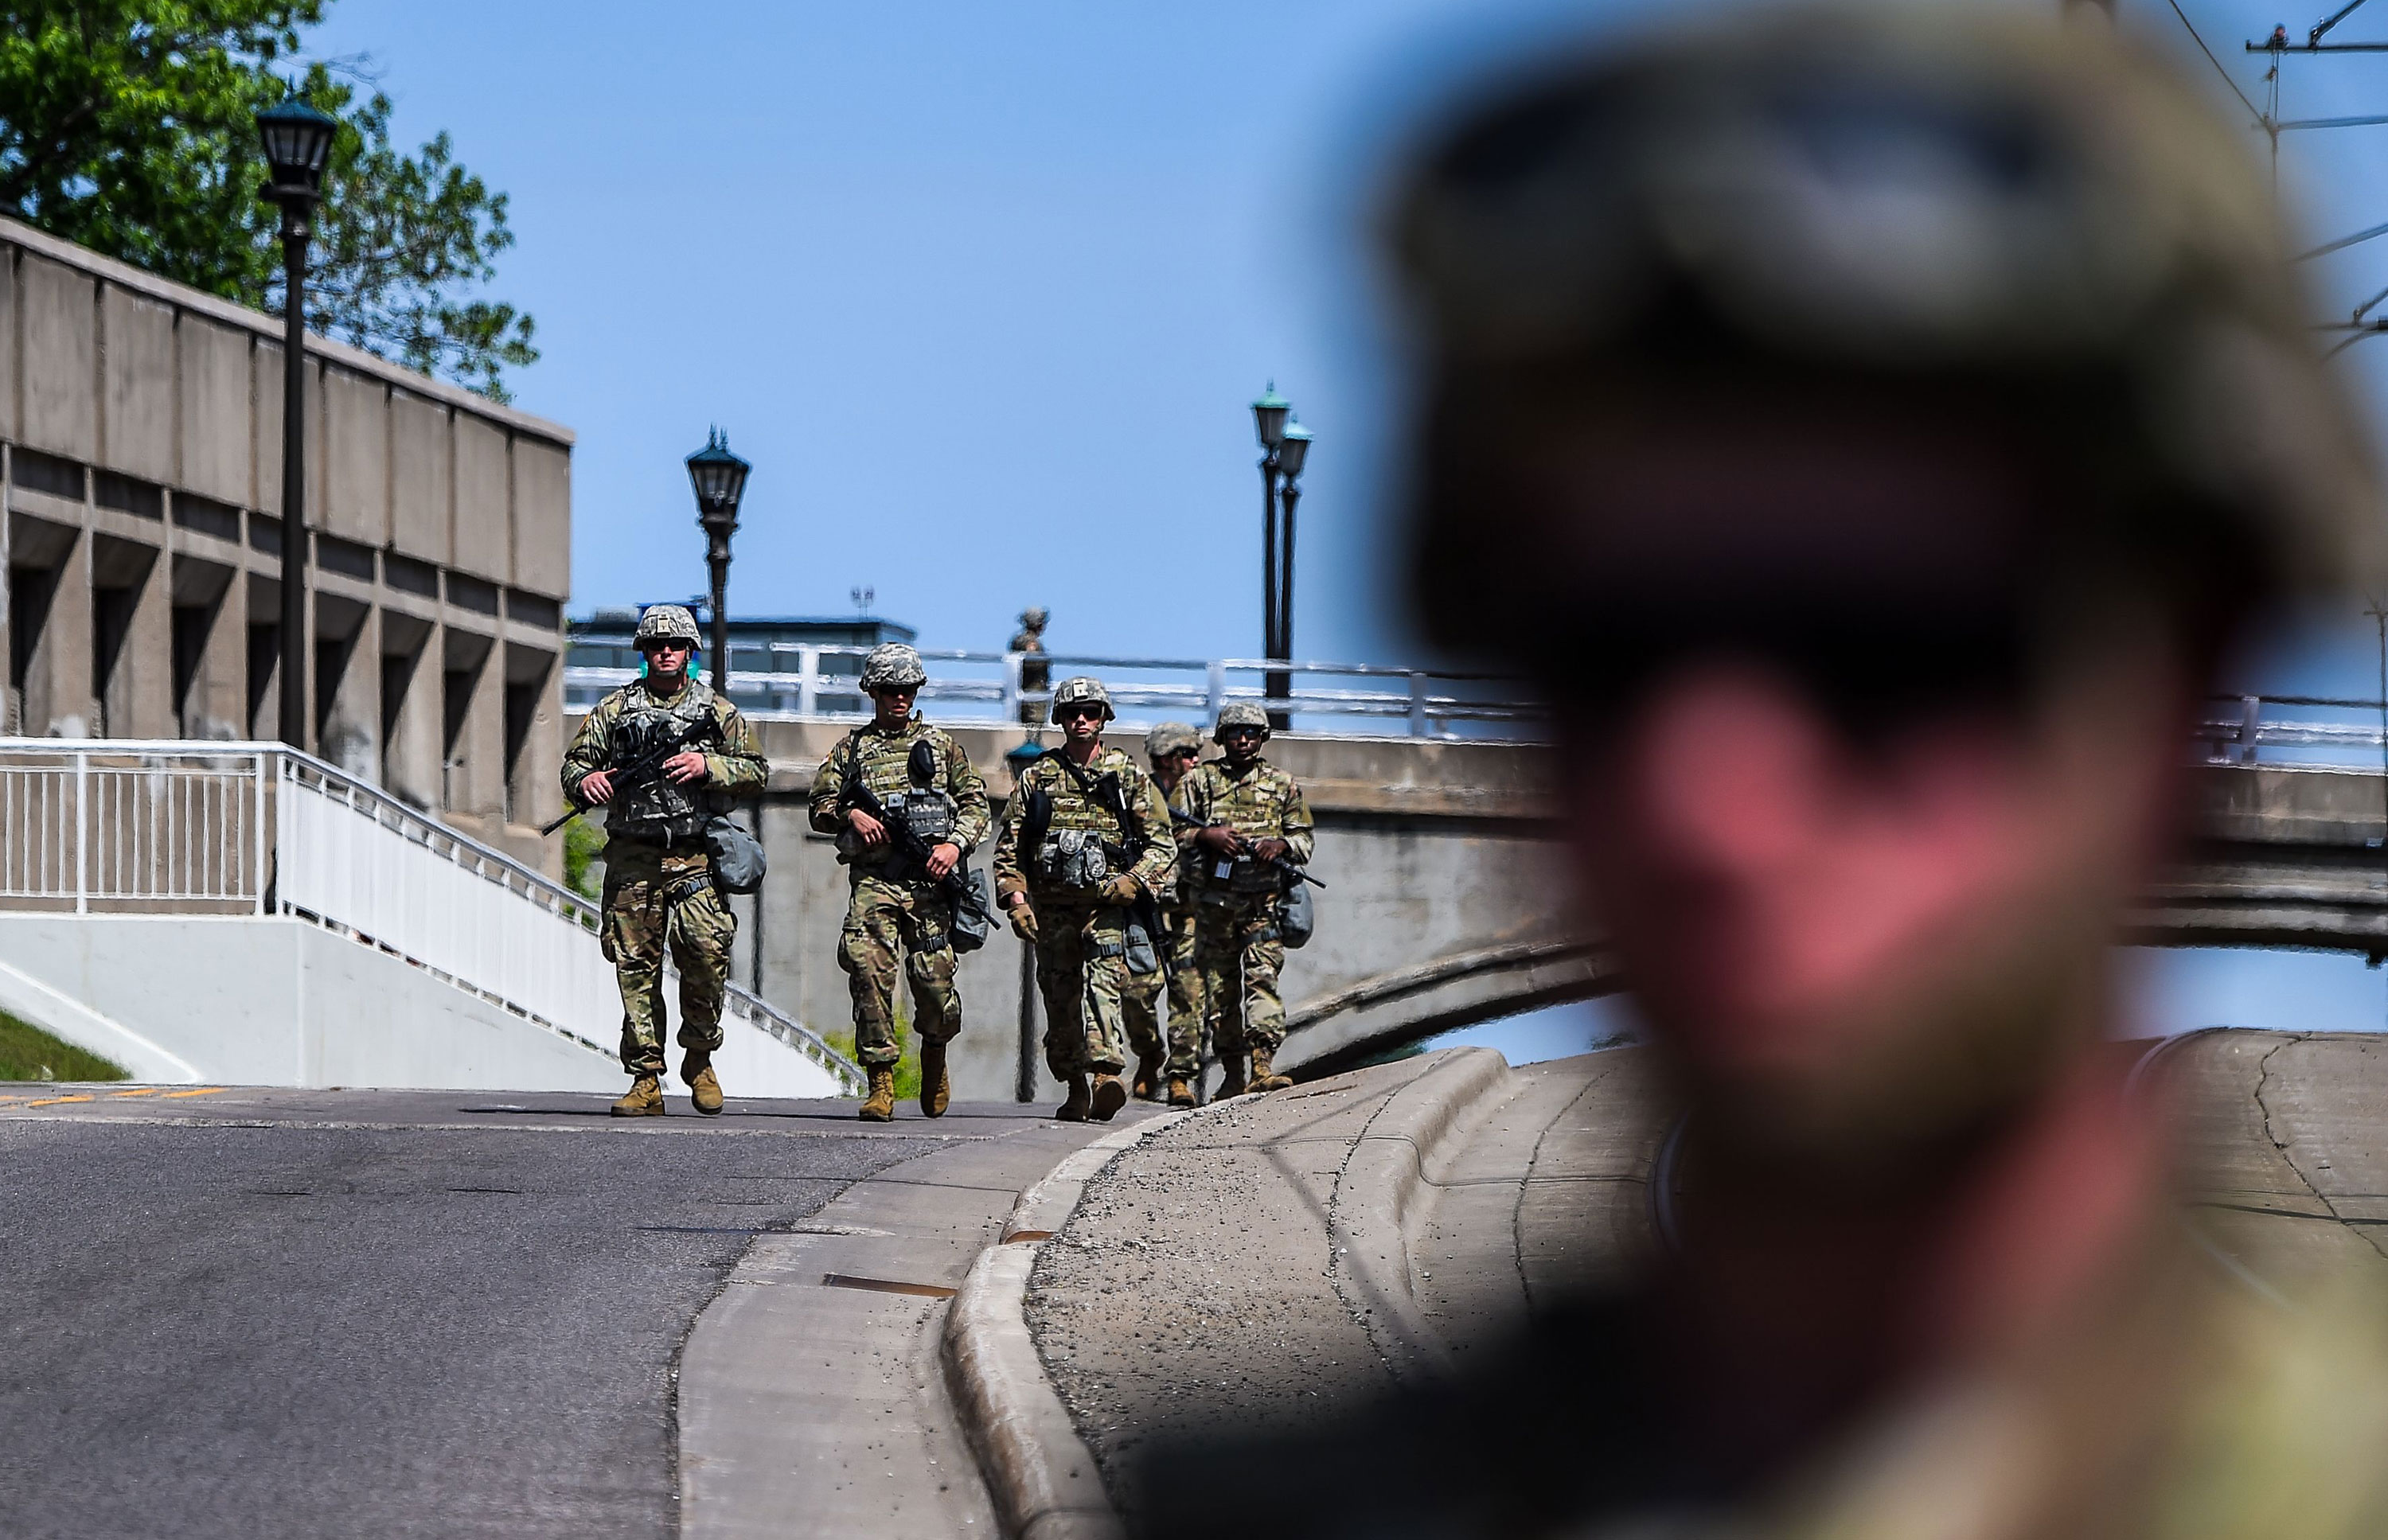 Minnesota National Guard soldiers patrol the area outside the State Capitol as hundreds gather to protest on May 31 in St. Paul, Minnesota.